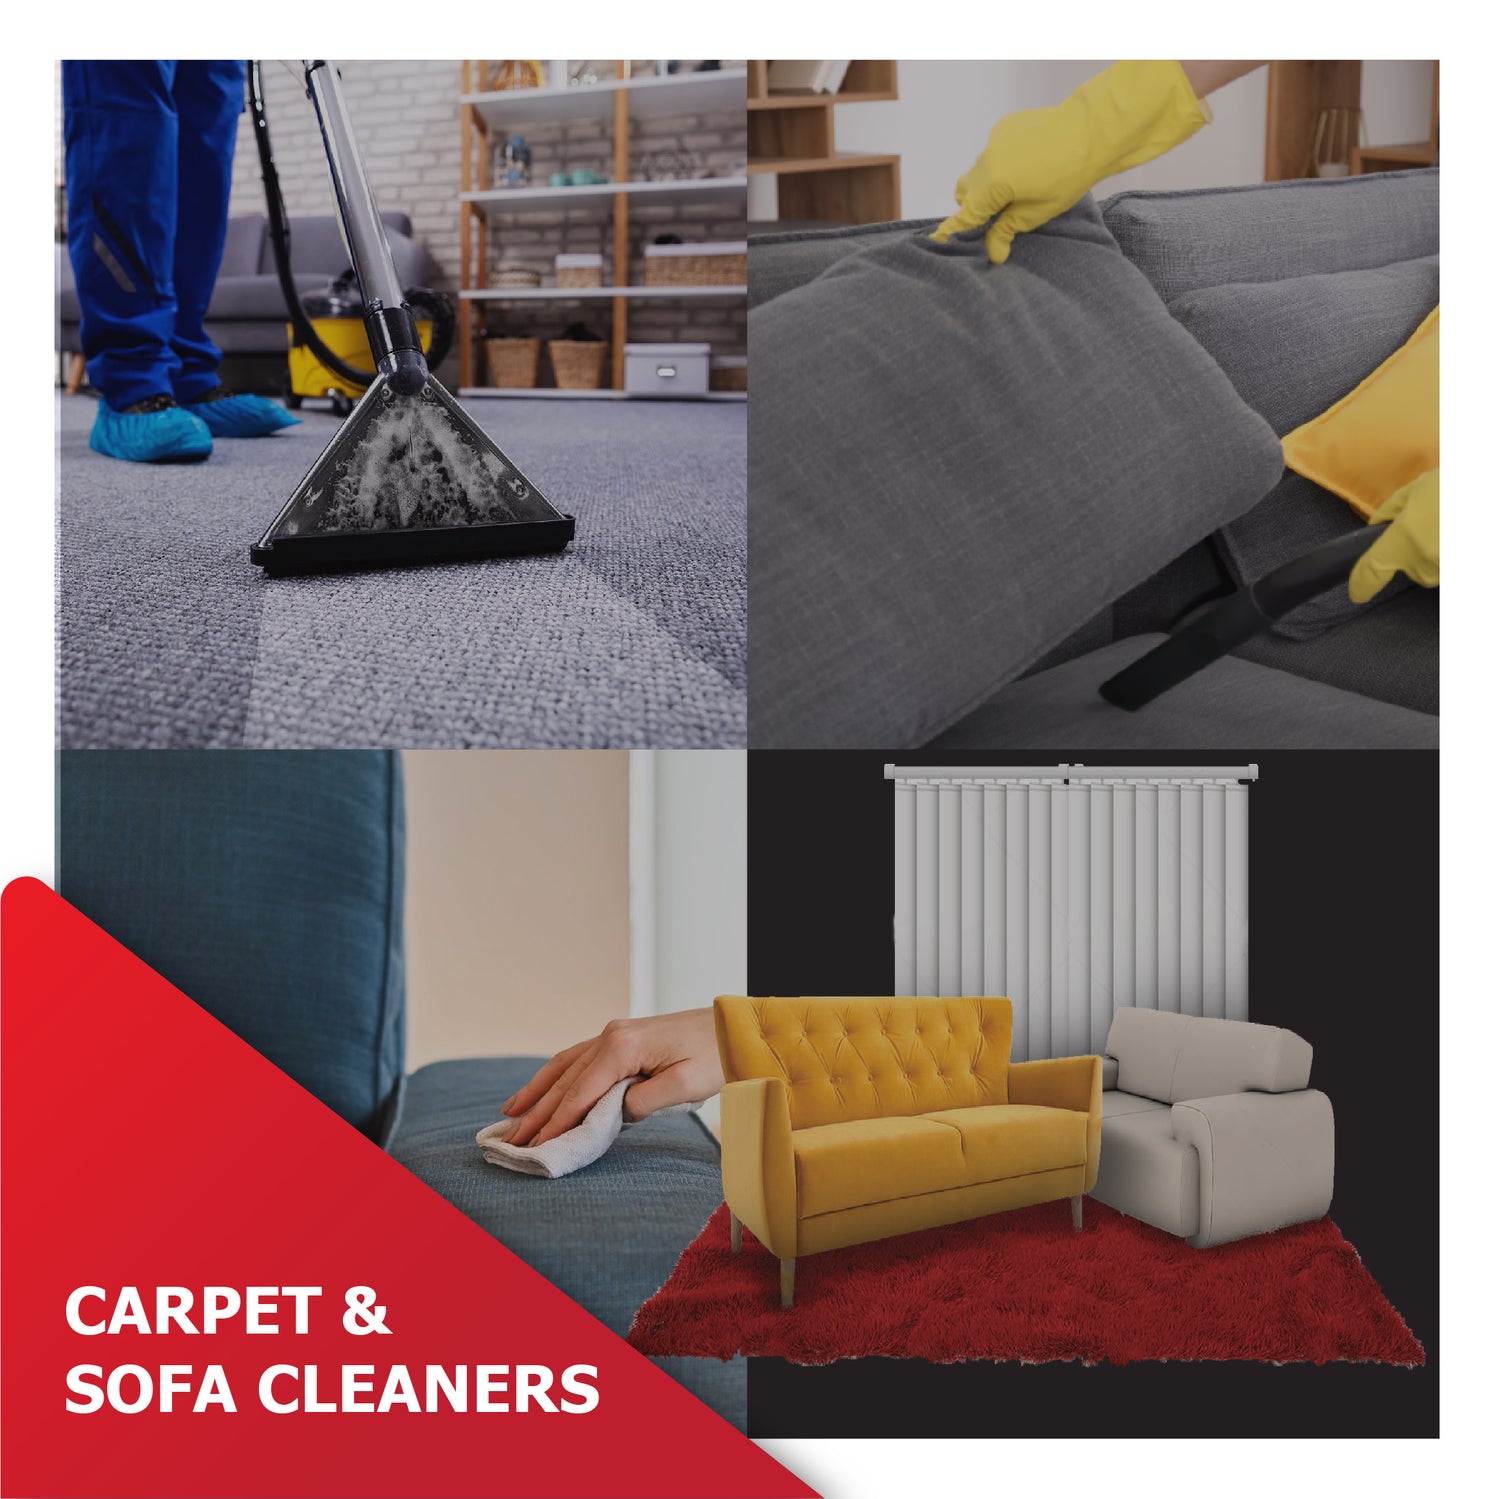 Carpet & Sofa Cleaners | Category